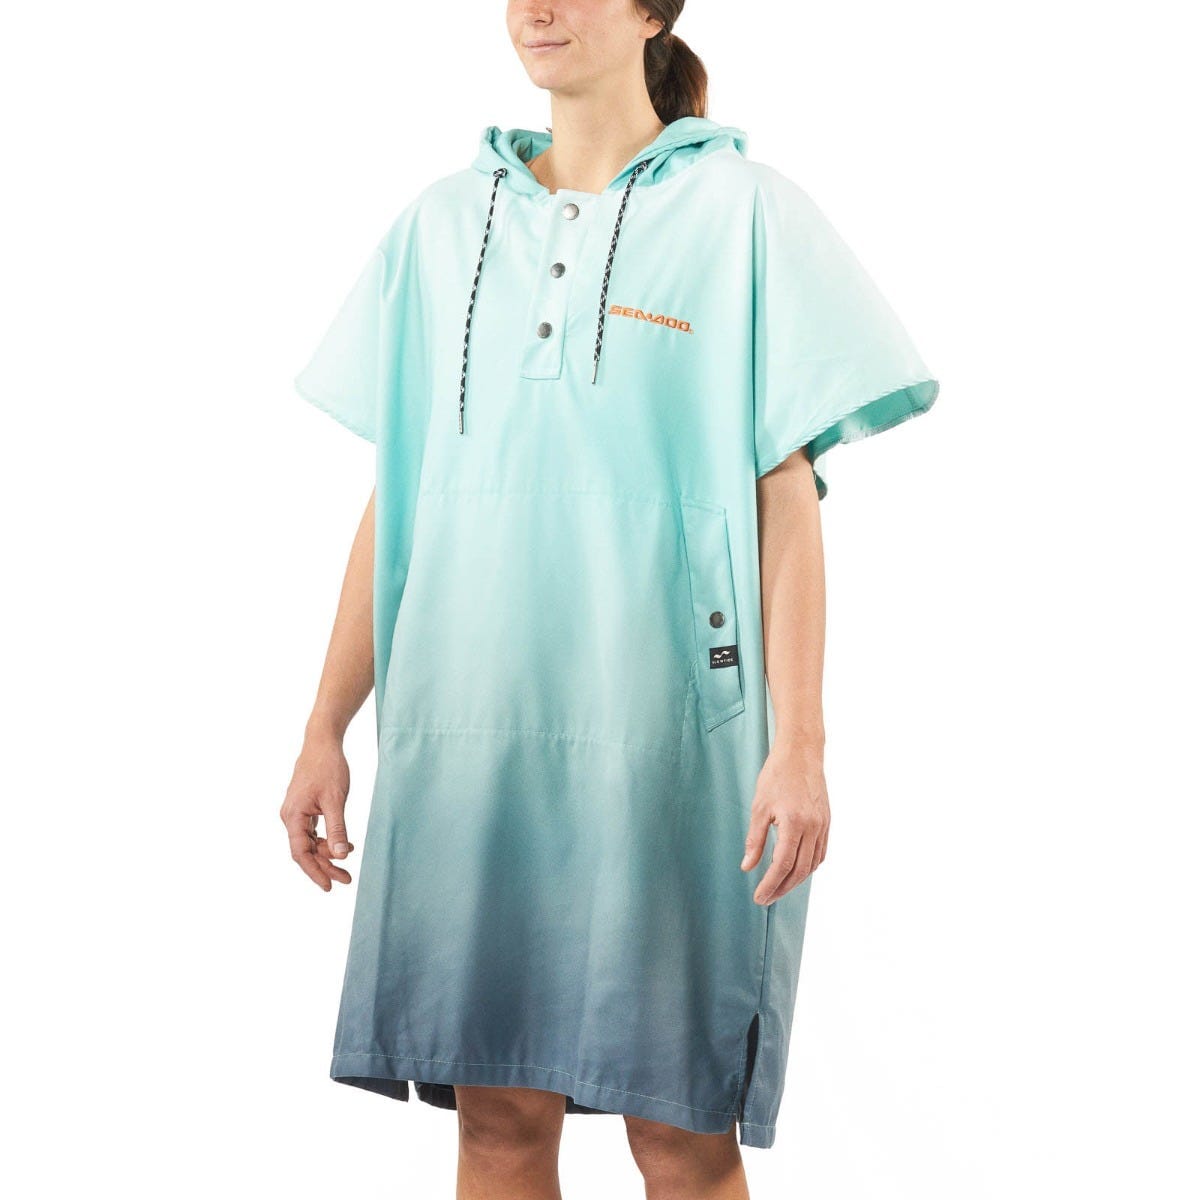 Sea-Doo Quick-Dry Changing Poncho by Slowtide / Turquoise / S/M